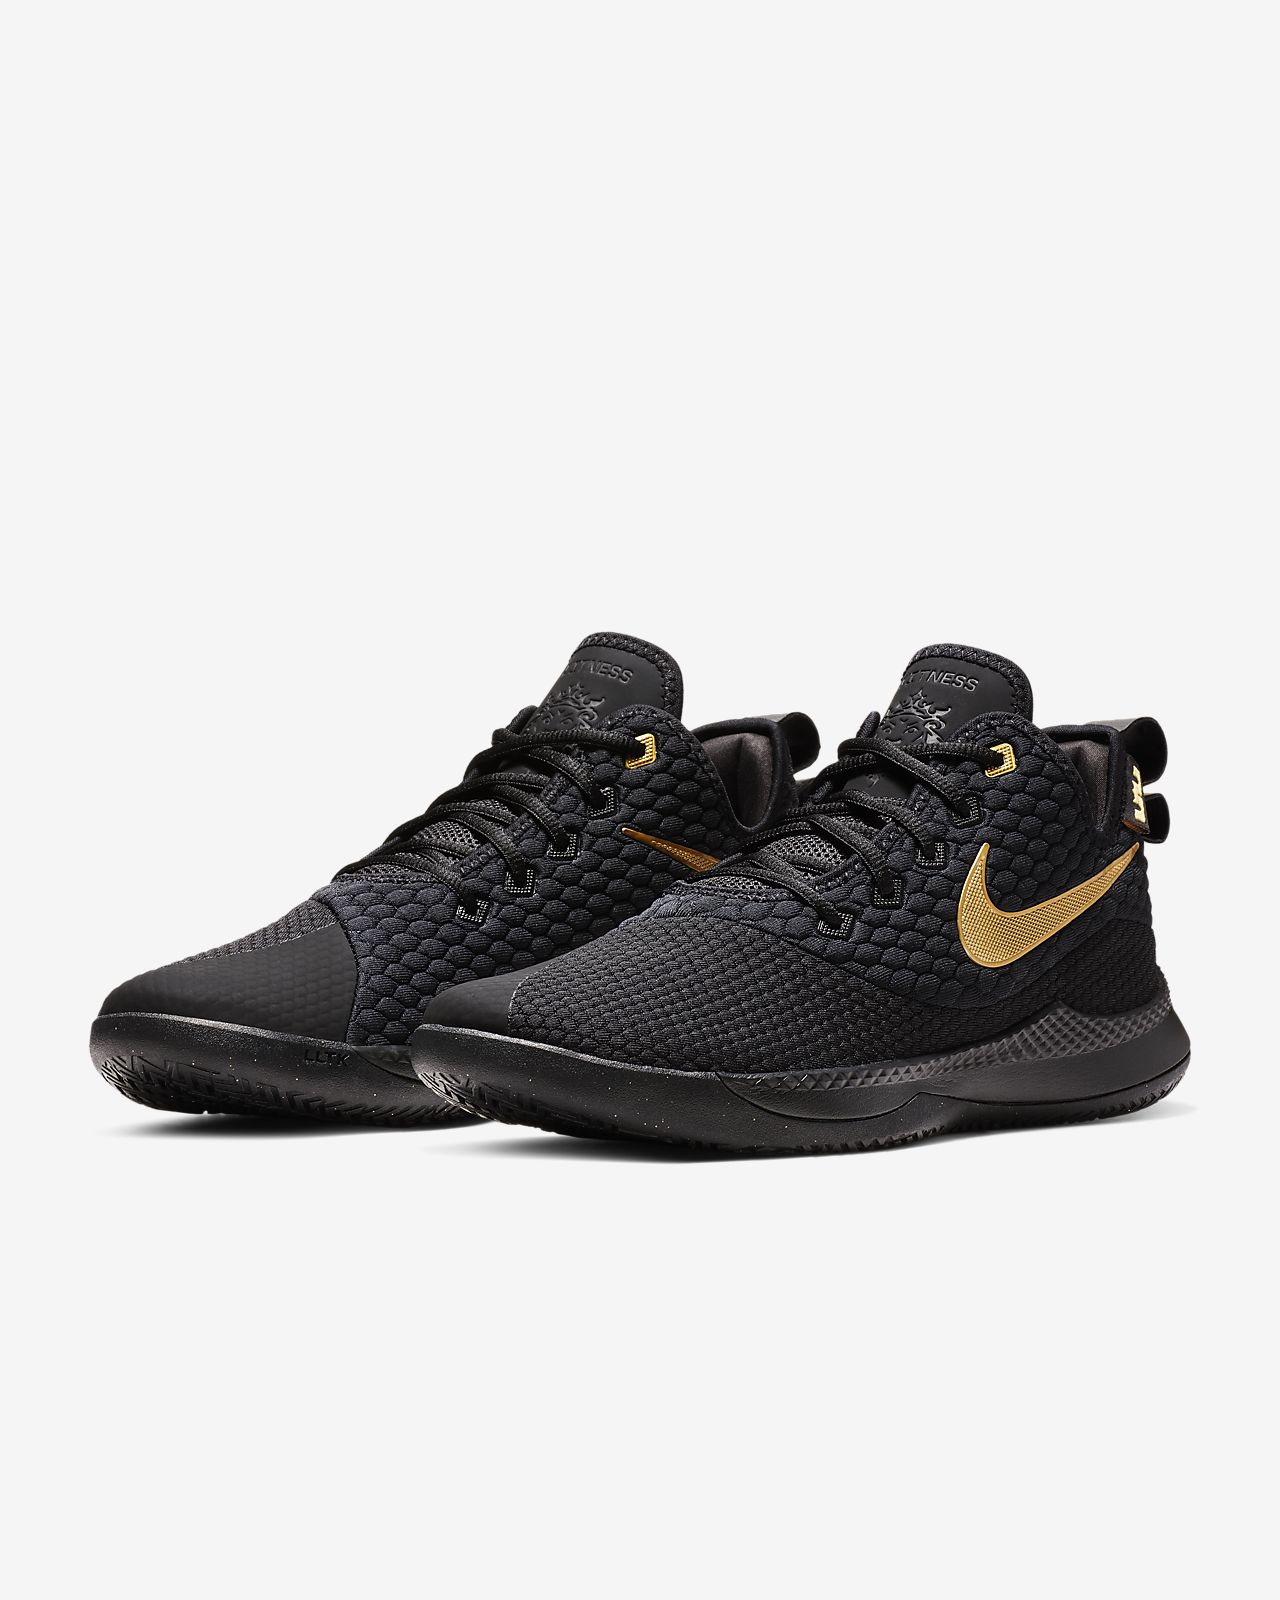 lebron witness 3 black and gold